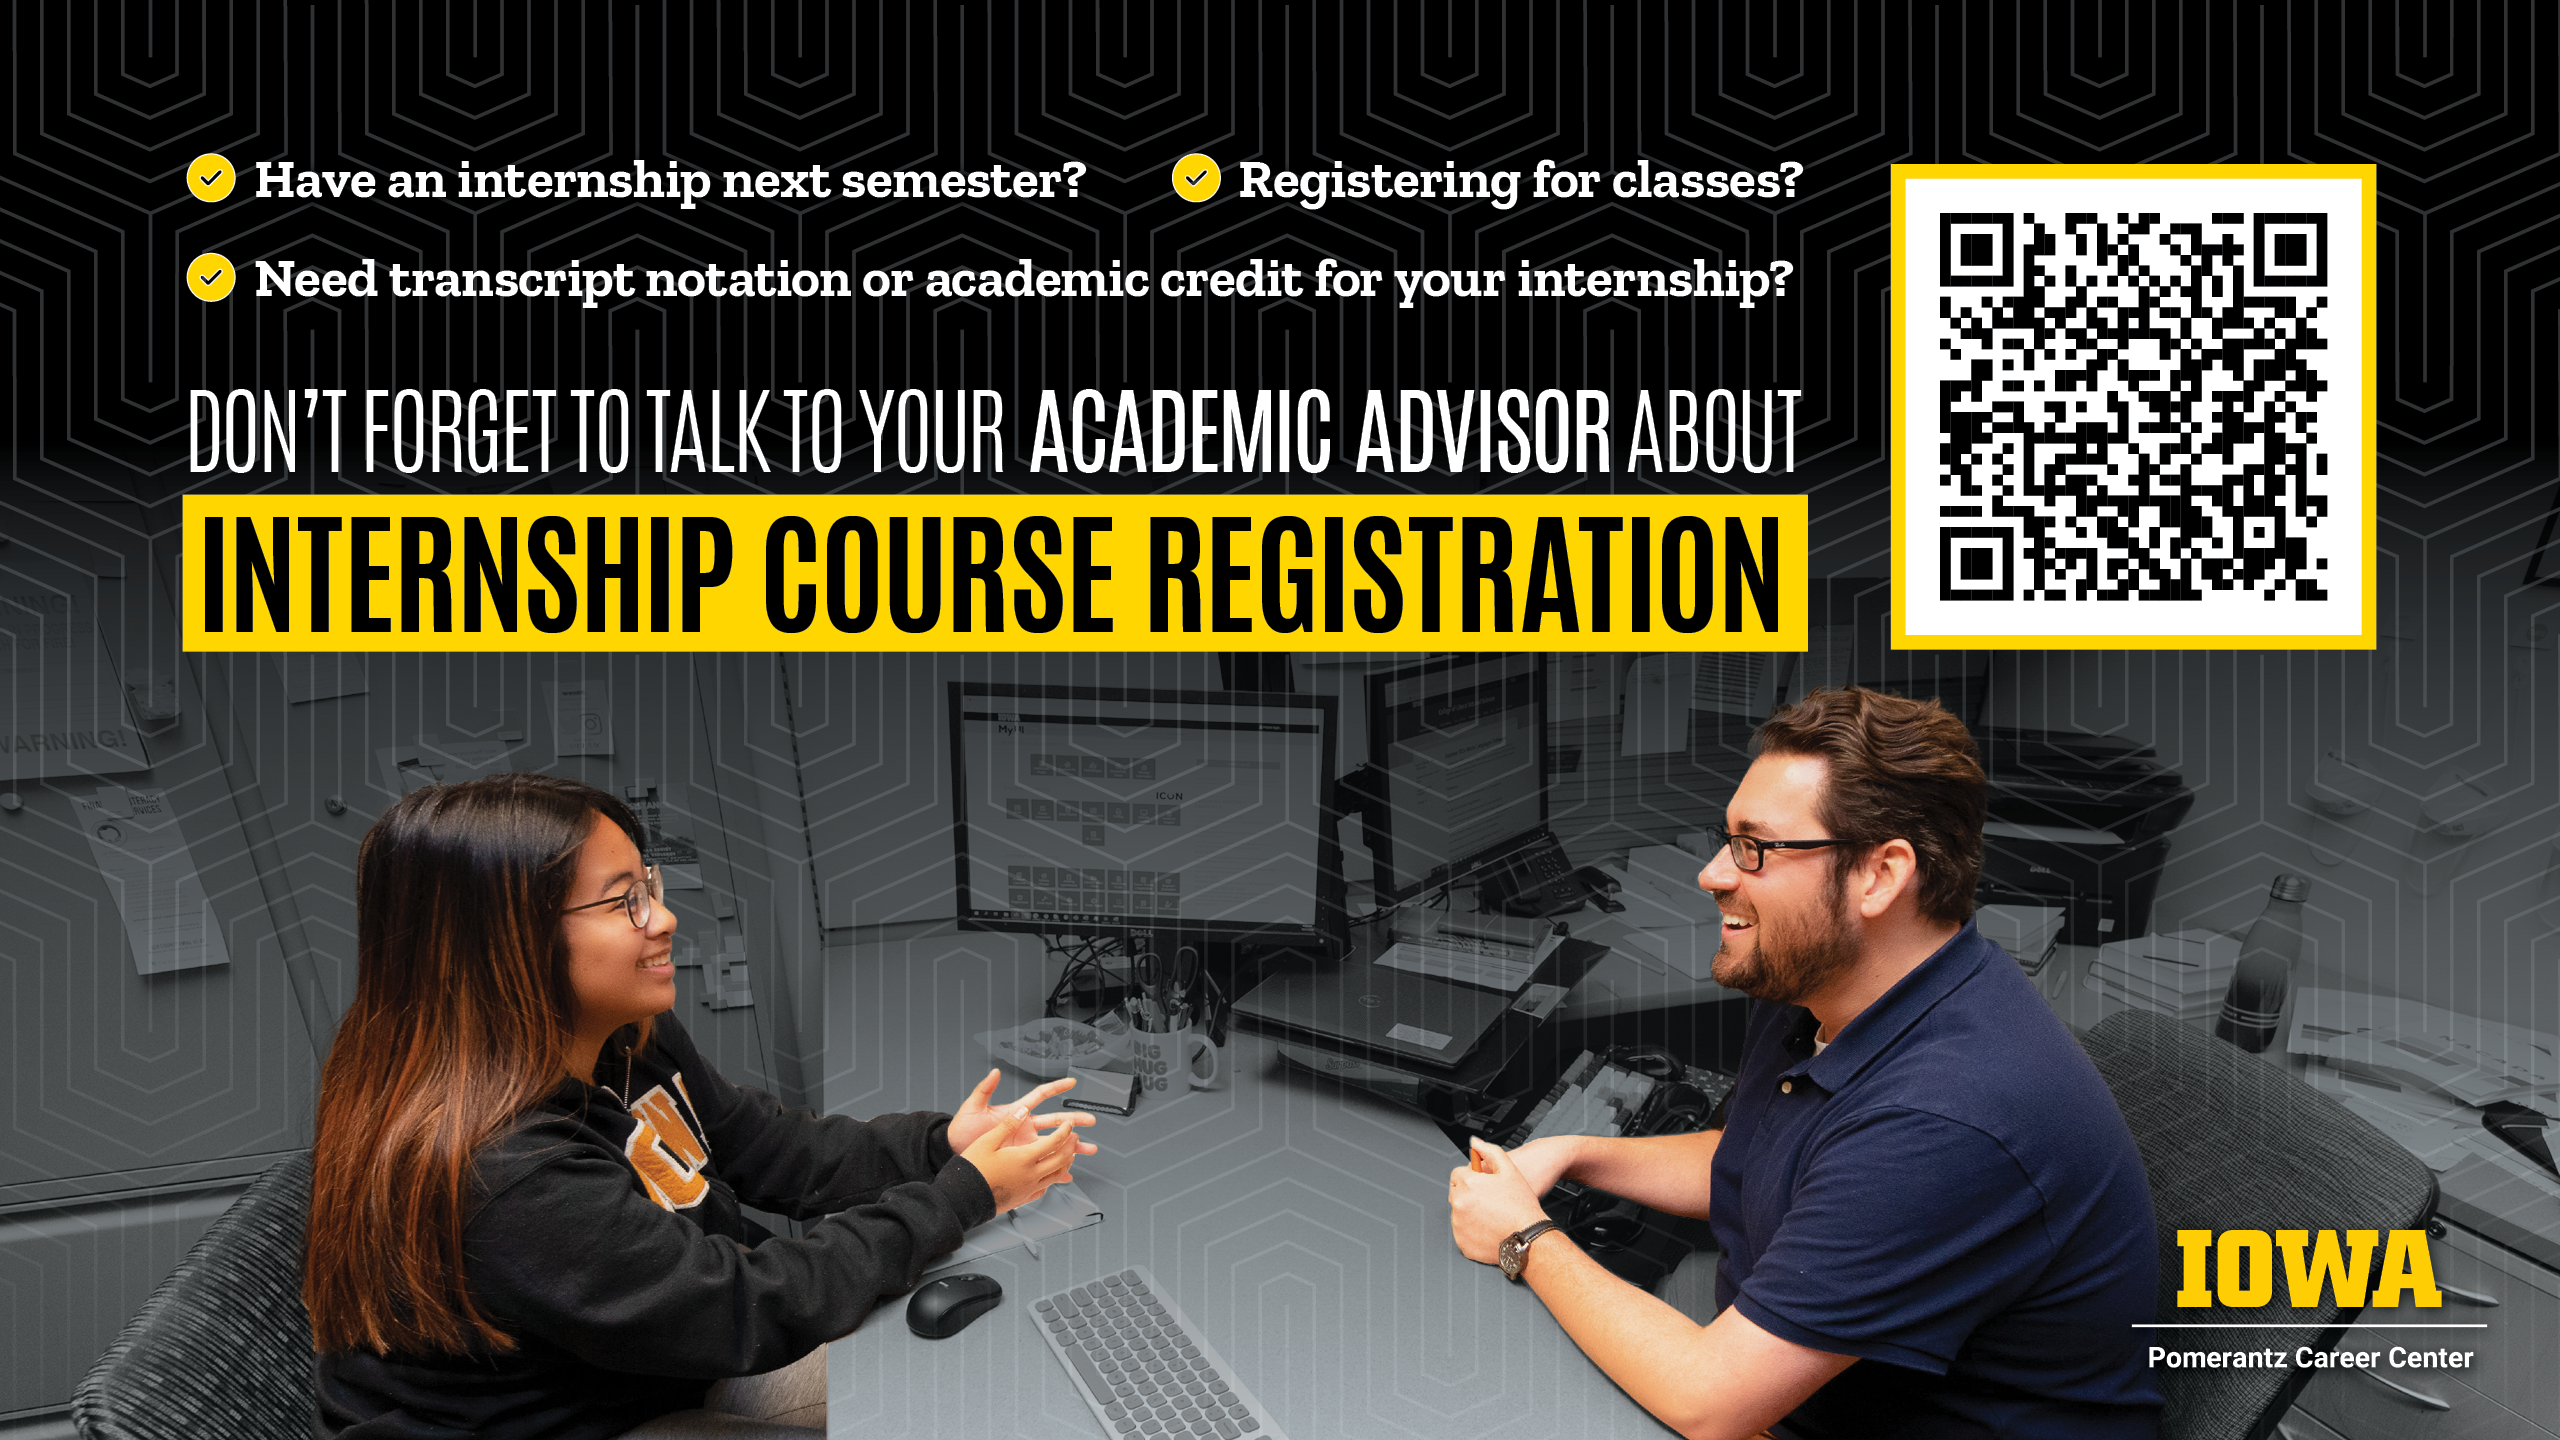 Don't forget to talk to your academic advisor about internship course registration!